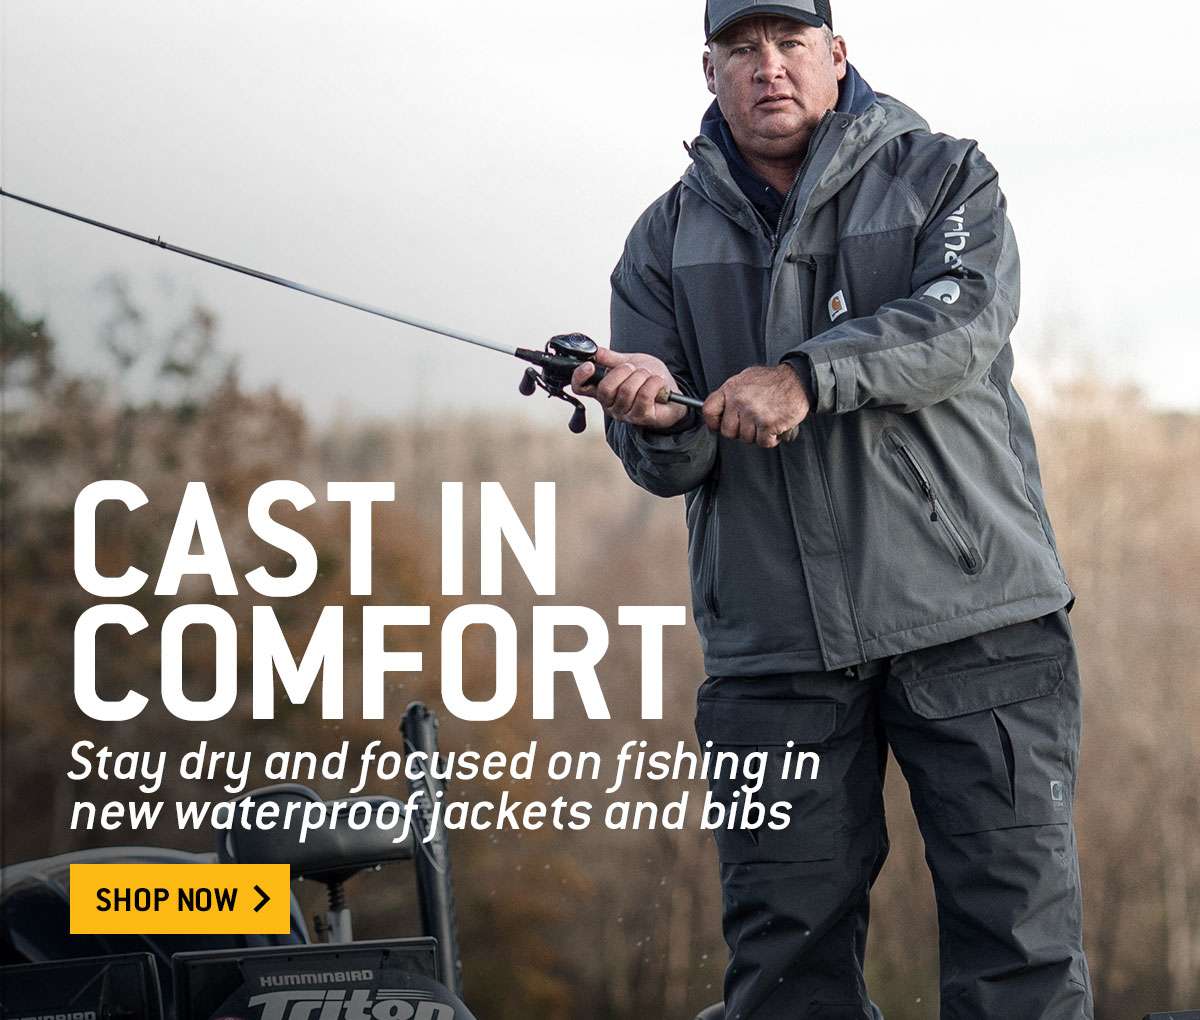 New high-performance fishing gear - Carhartt.com Email Archive